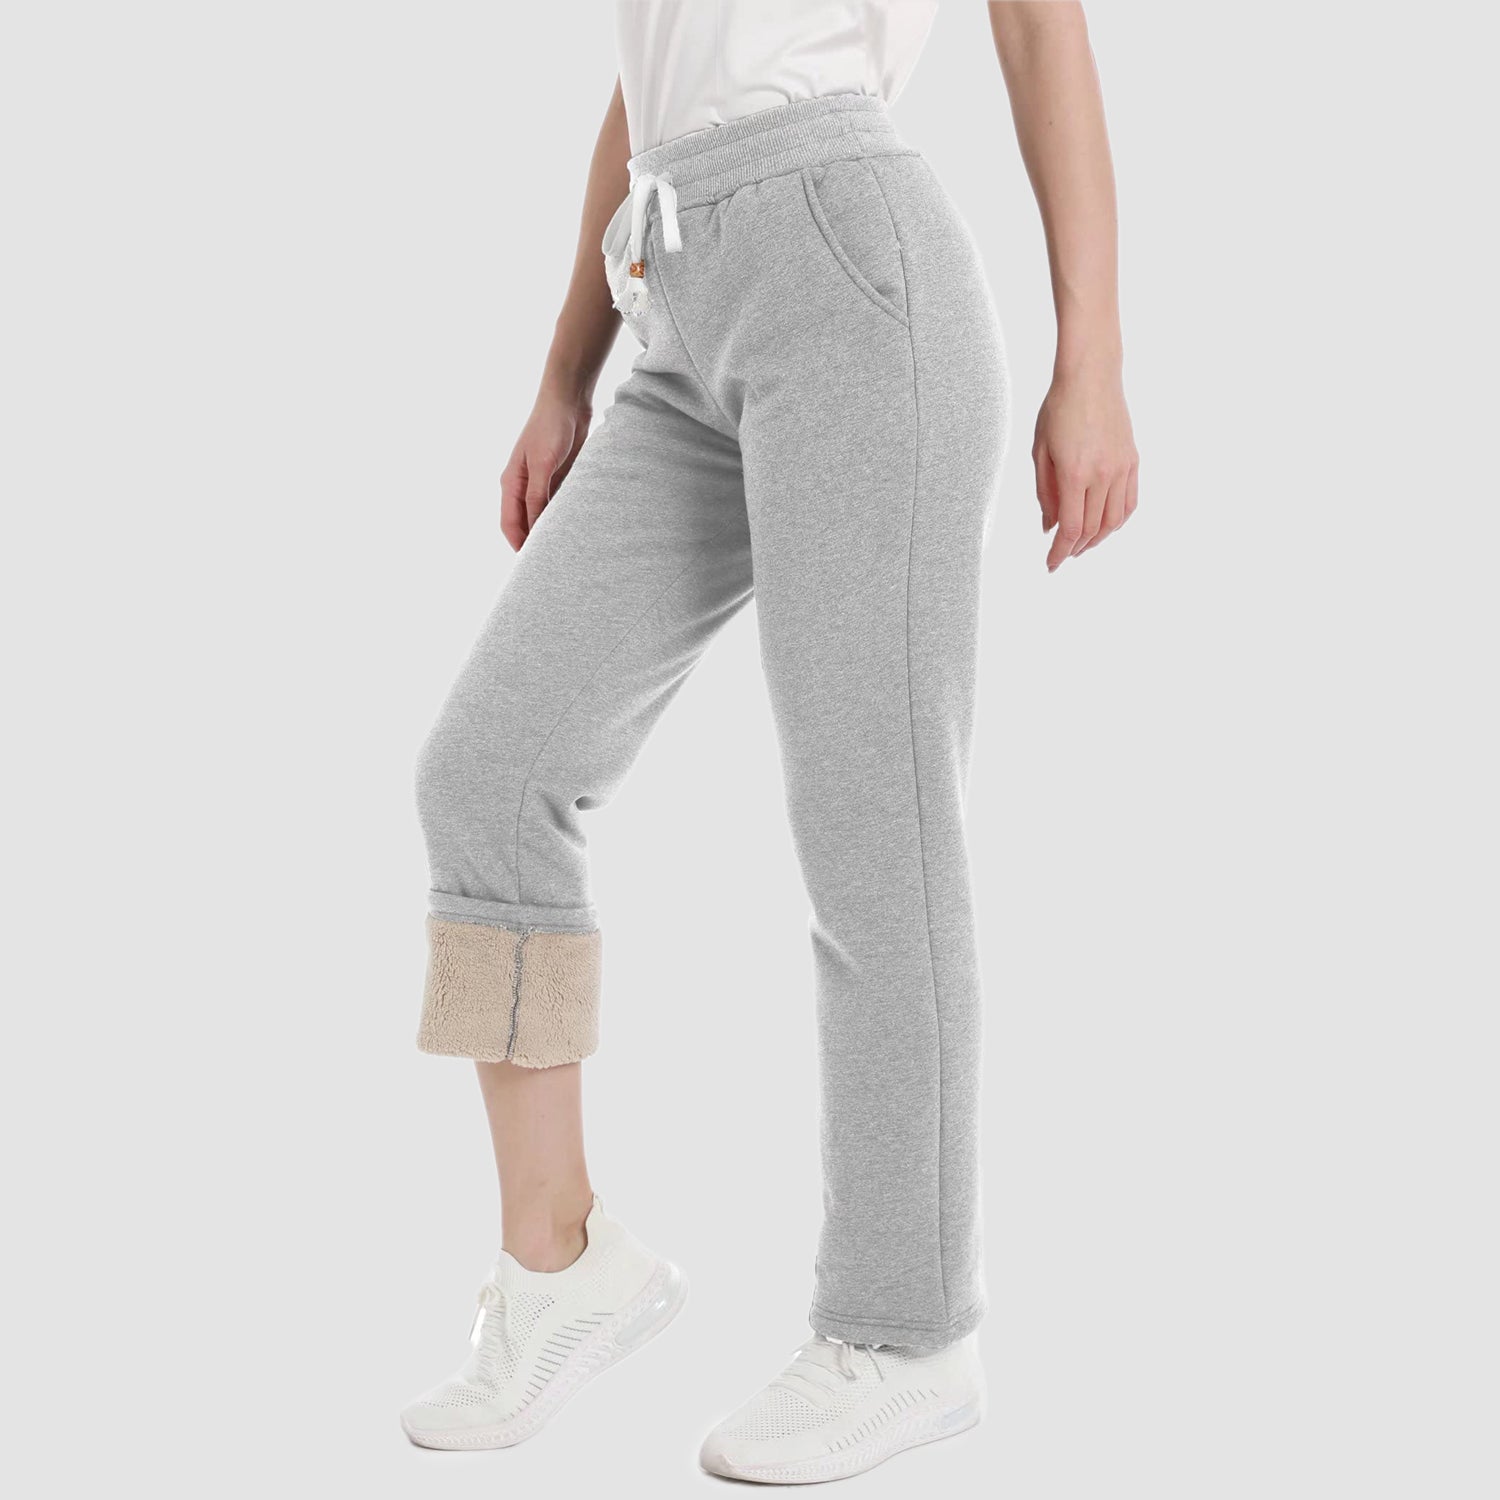 Women's Warm Winter Pants Sherpa Lined Athletic Sweatpants Jogger Pants with 3 Pockets